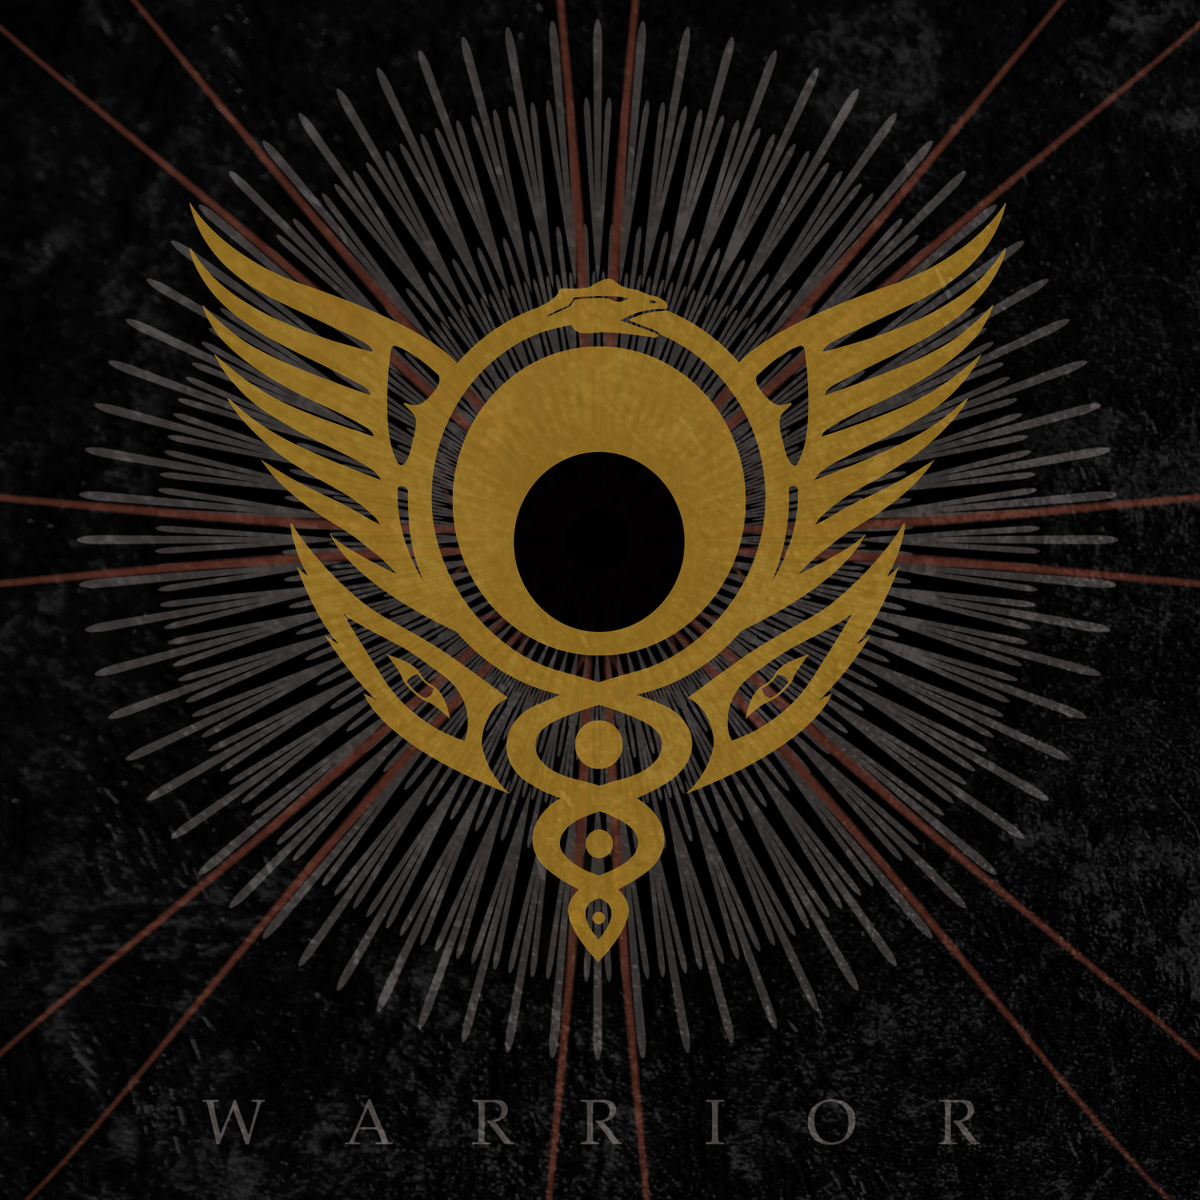 Anilah & Wardruna Track "Warrior (Revisited)" Now Streaming